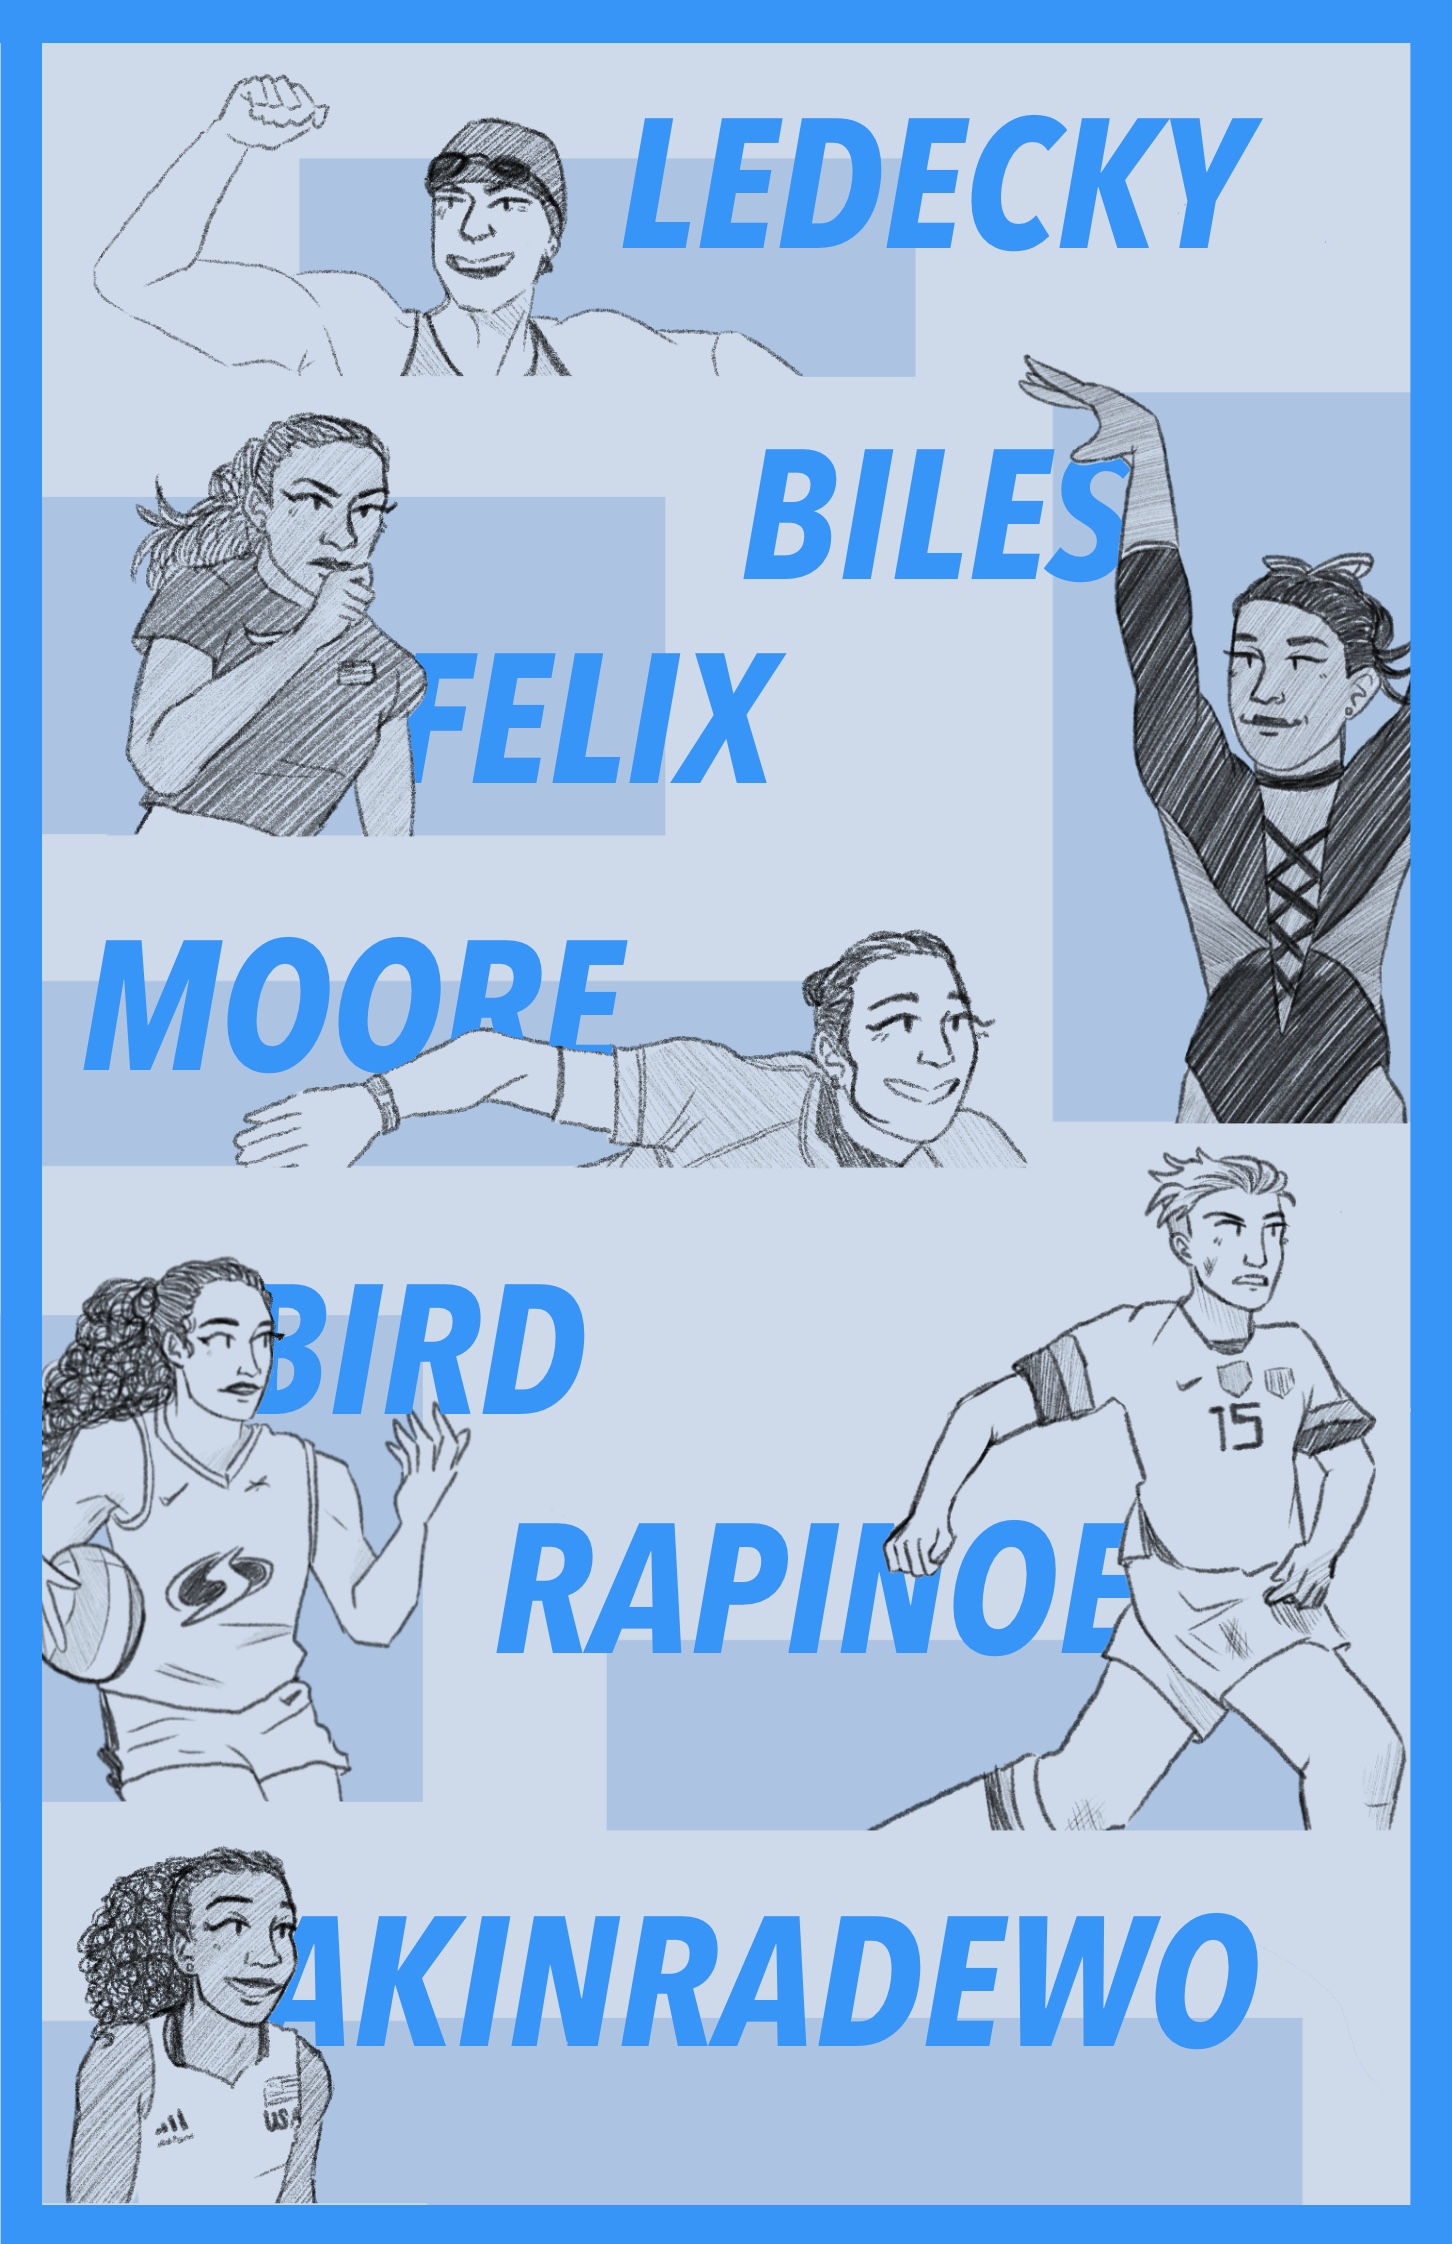 Poster in shades of blue with black drawings depicting Olympic athletes from the 2021 games.